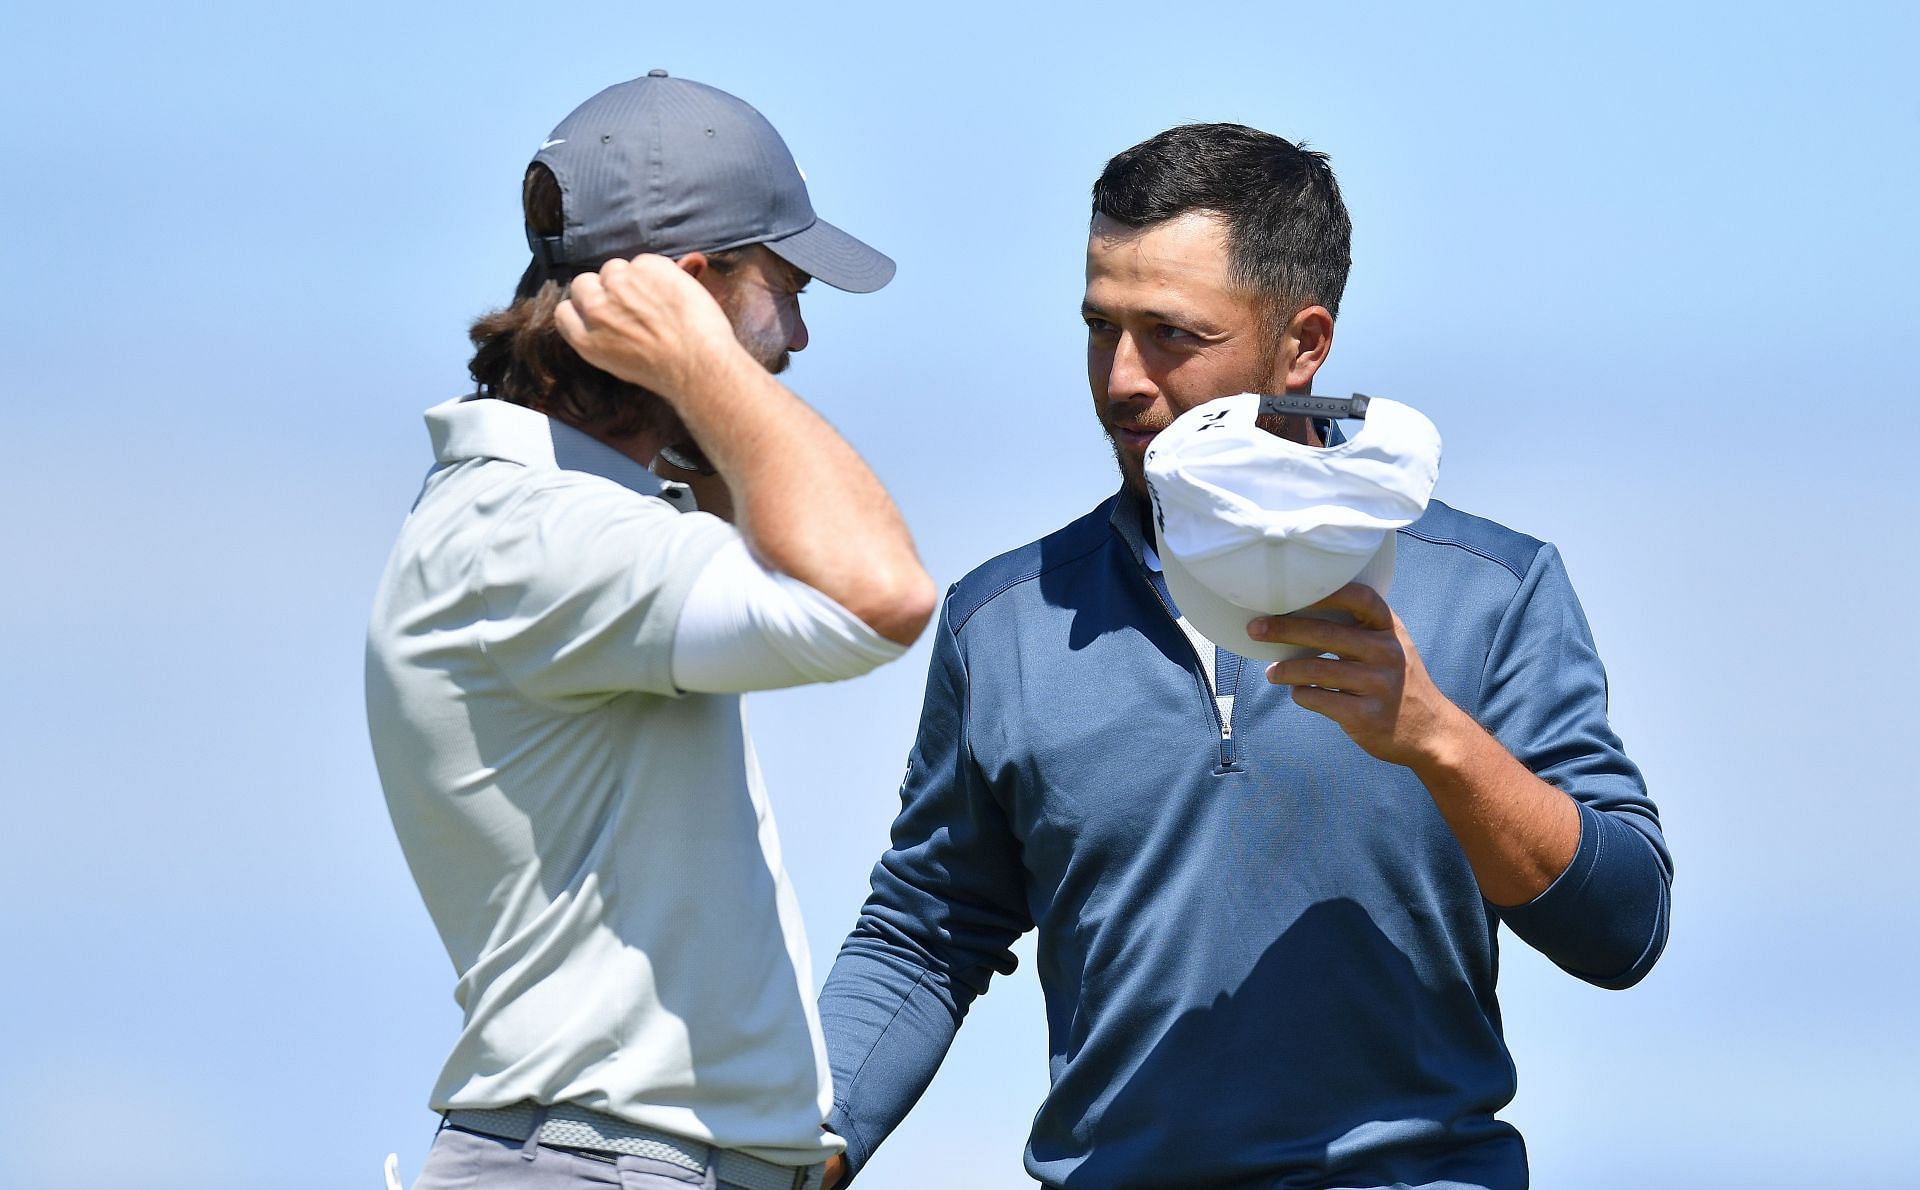 Xander Schauffele and Tommy Fleetwood (Image via Mark Runnacles/Getty Images)